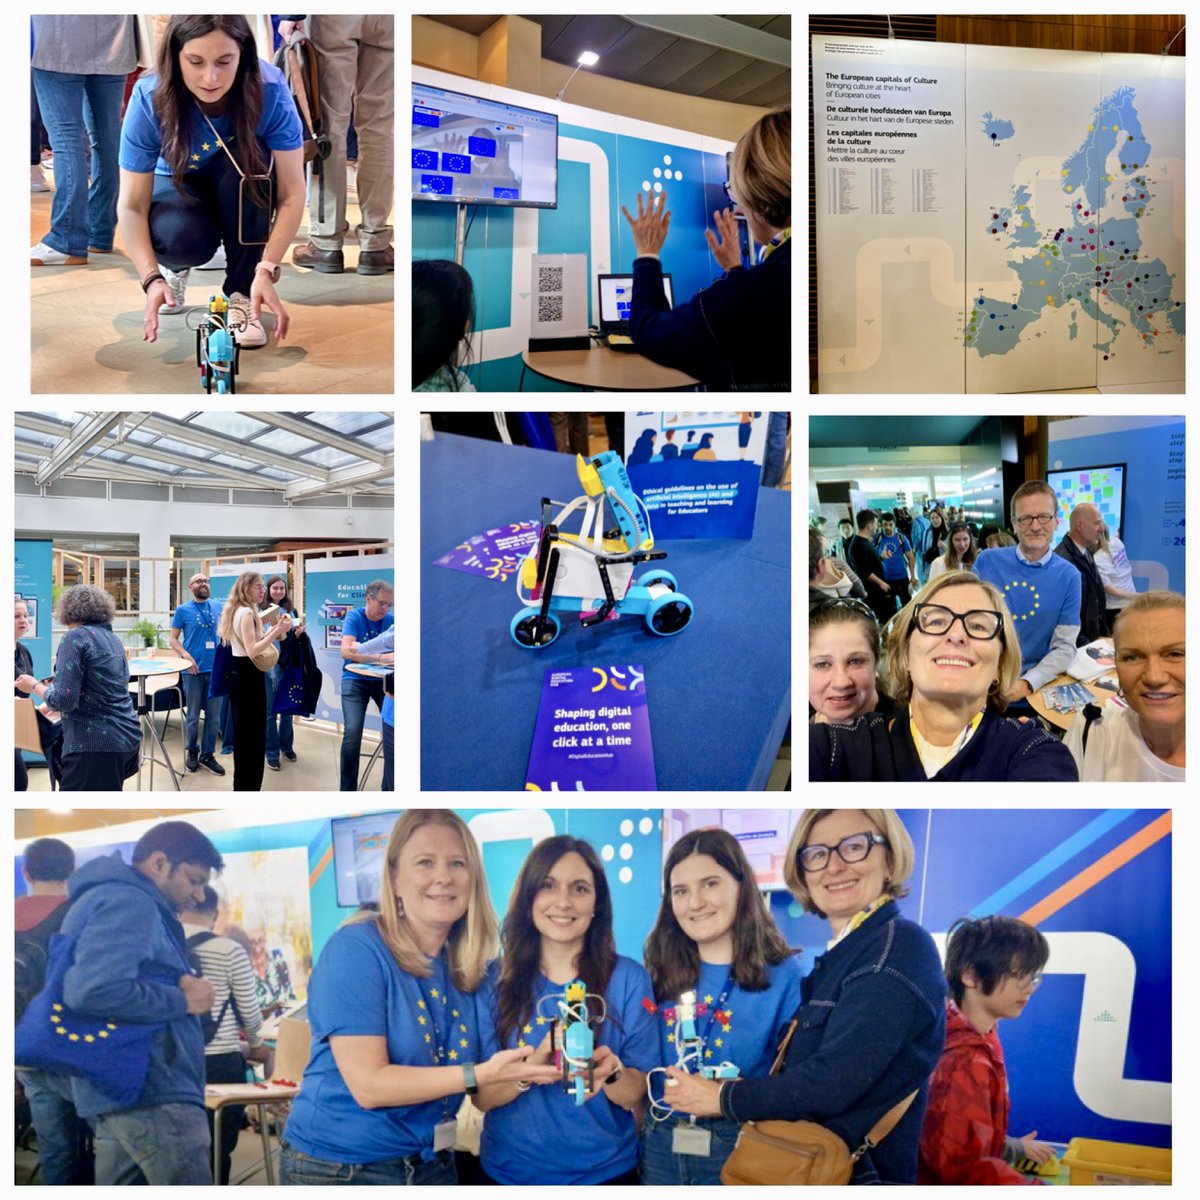 Counting down to #EuropeDay🇪🇺 with colleagues doing great work & getting lots of interest & participation at #DGEAC stands for @EU_Commission #OpenDay! 👏👏👏